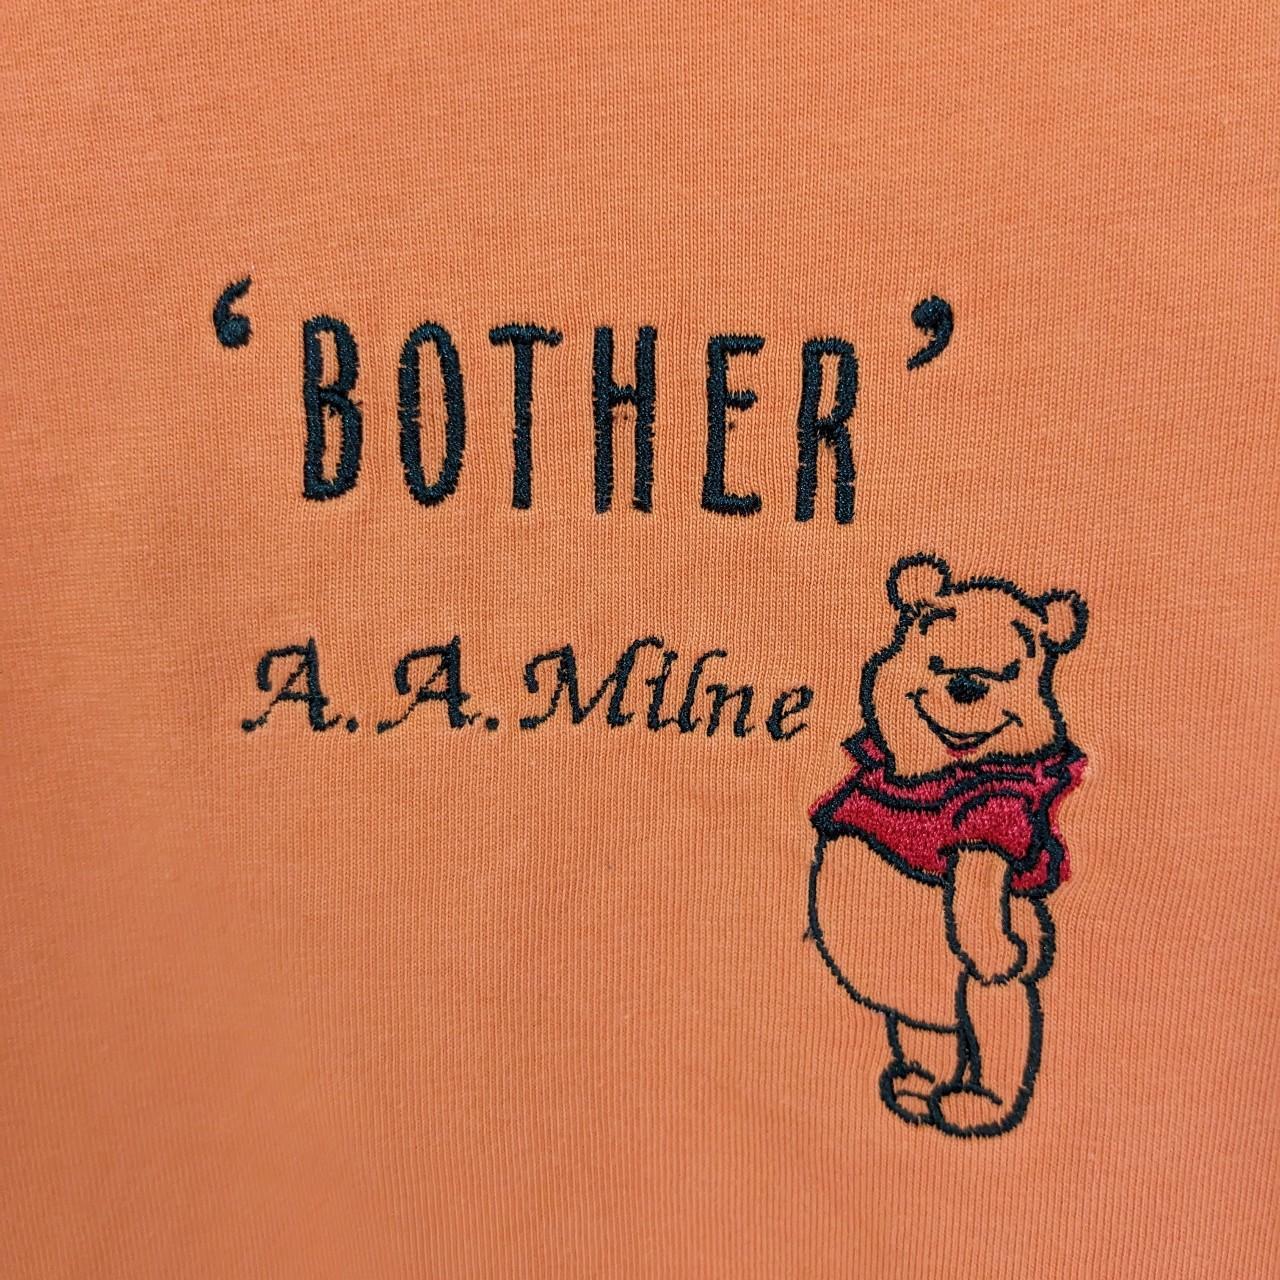 Size Small Reworked Orange T-shirt Embroidered Winnie the Pooh Design and Quote